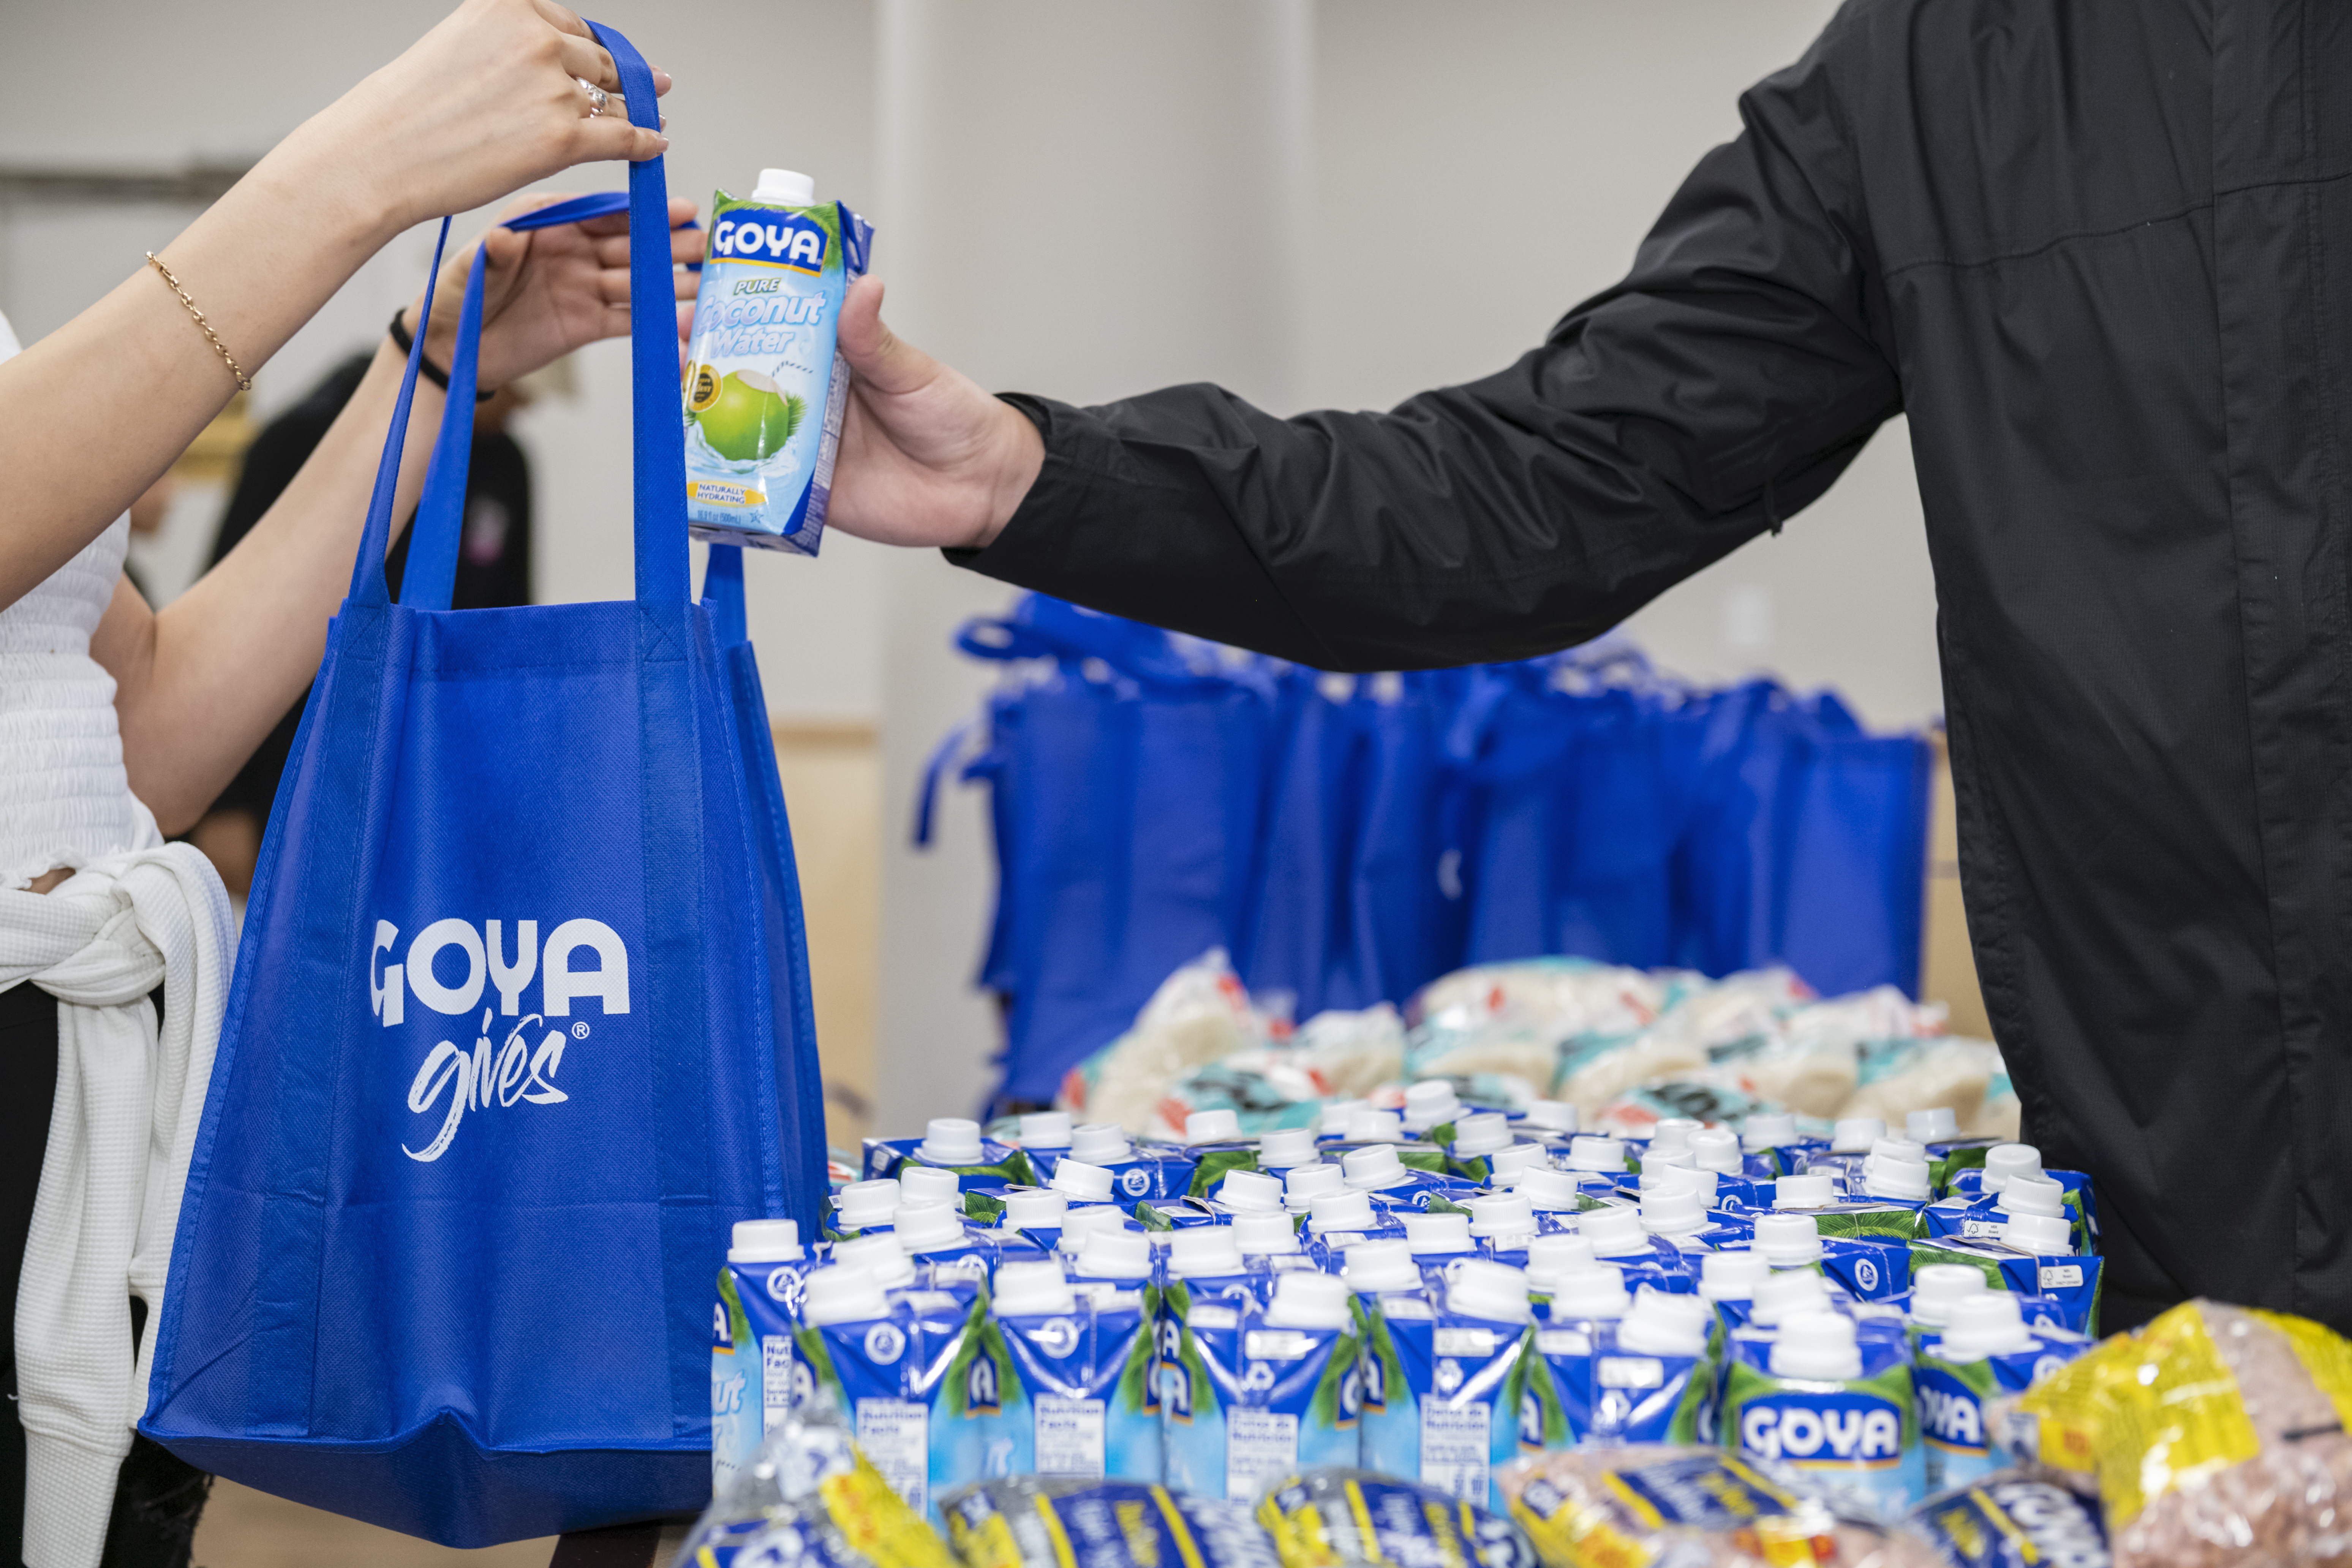 Press Release: GOYA FOODS MAKES INITIAL DONATION OF  OVER 200,000 POUNDS OF FOOD AND OVER 20,000 MASKS NATIONWIDE DURING COVID-19 PANDEMIC